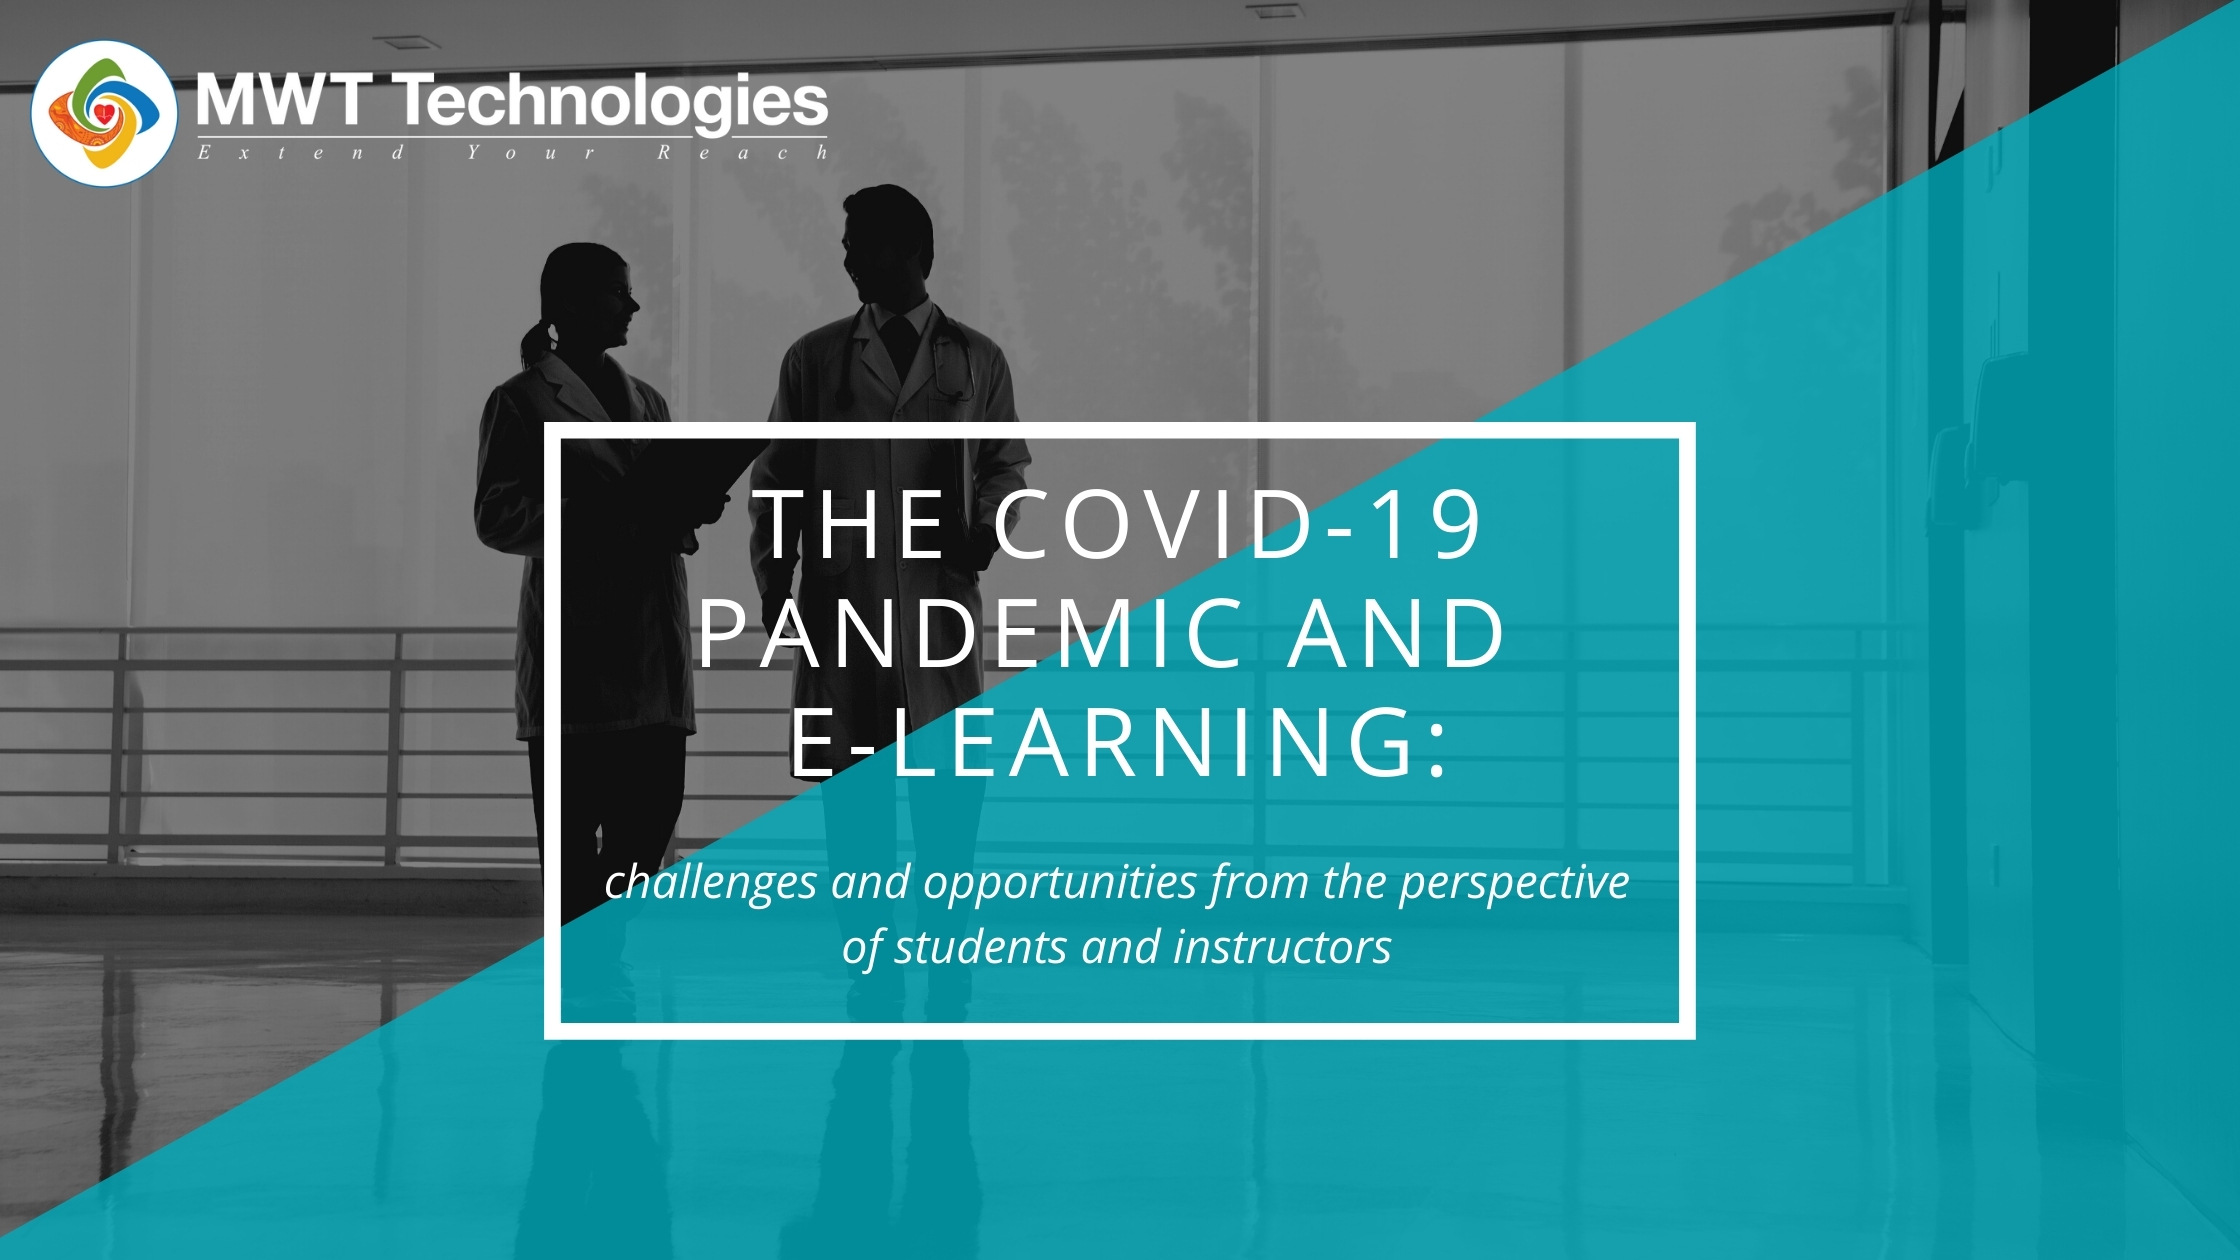 COVID-19 Pandemic and E-learning: New challenges for students and instructors alike!